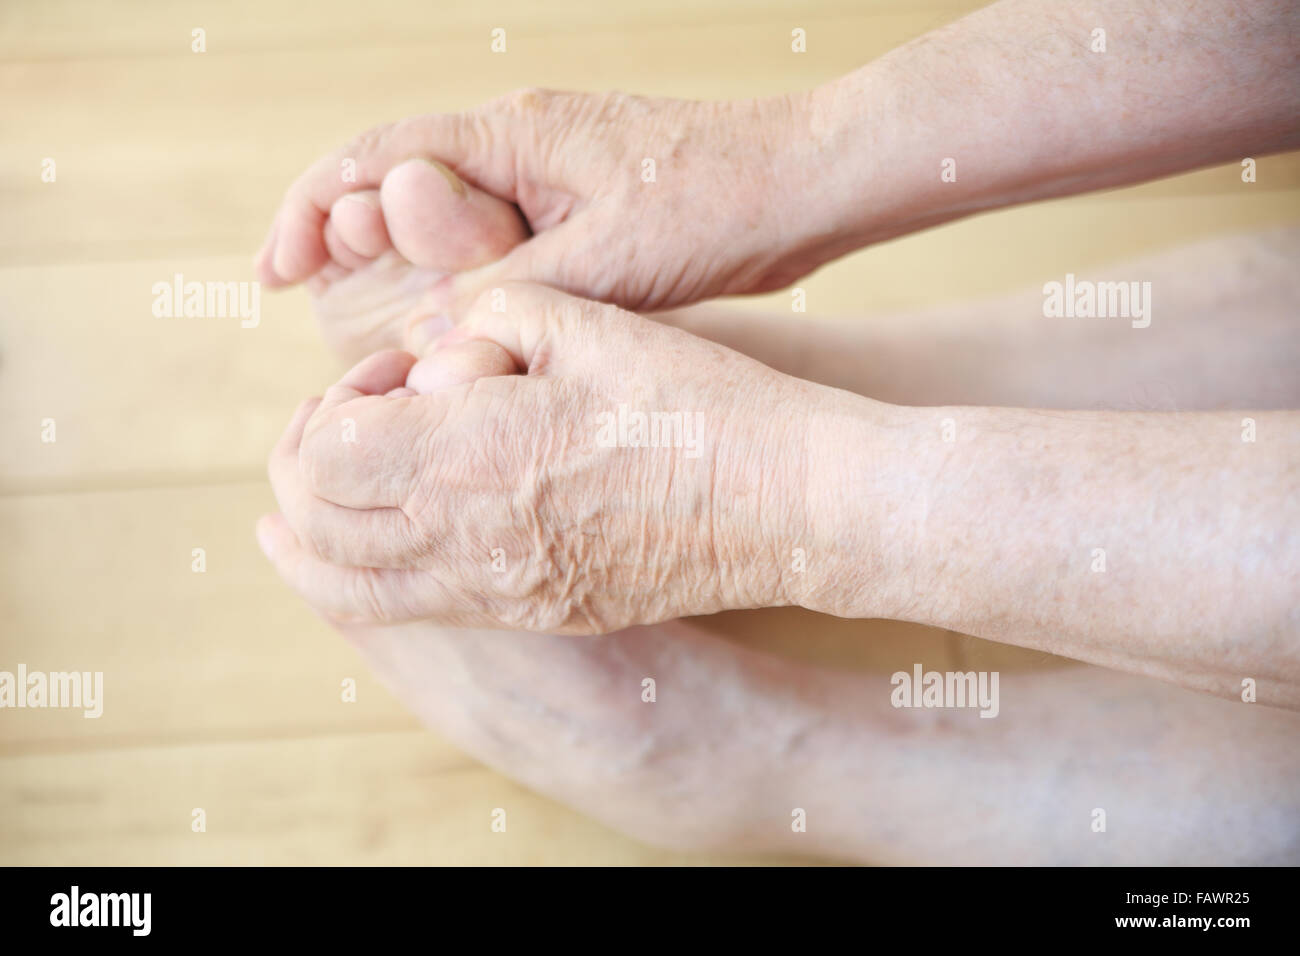 Senior man stretches, and holds his toes. Stock Photo